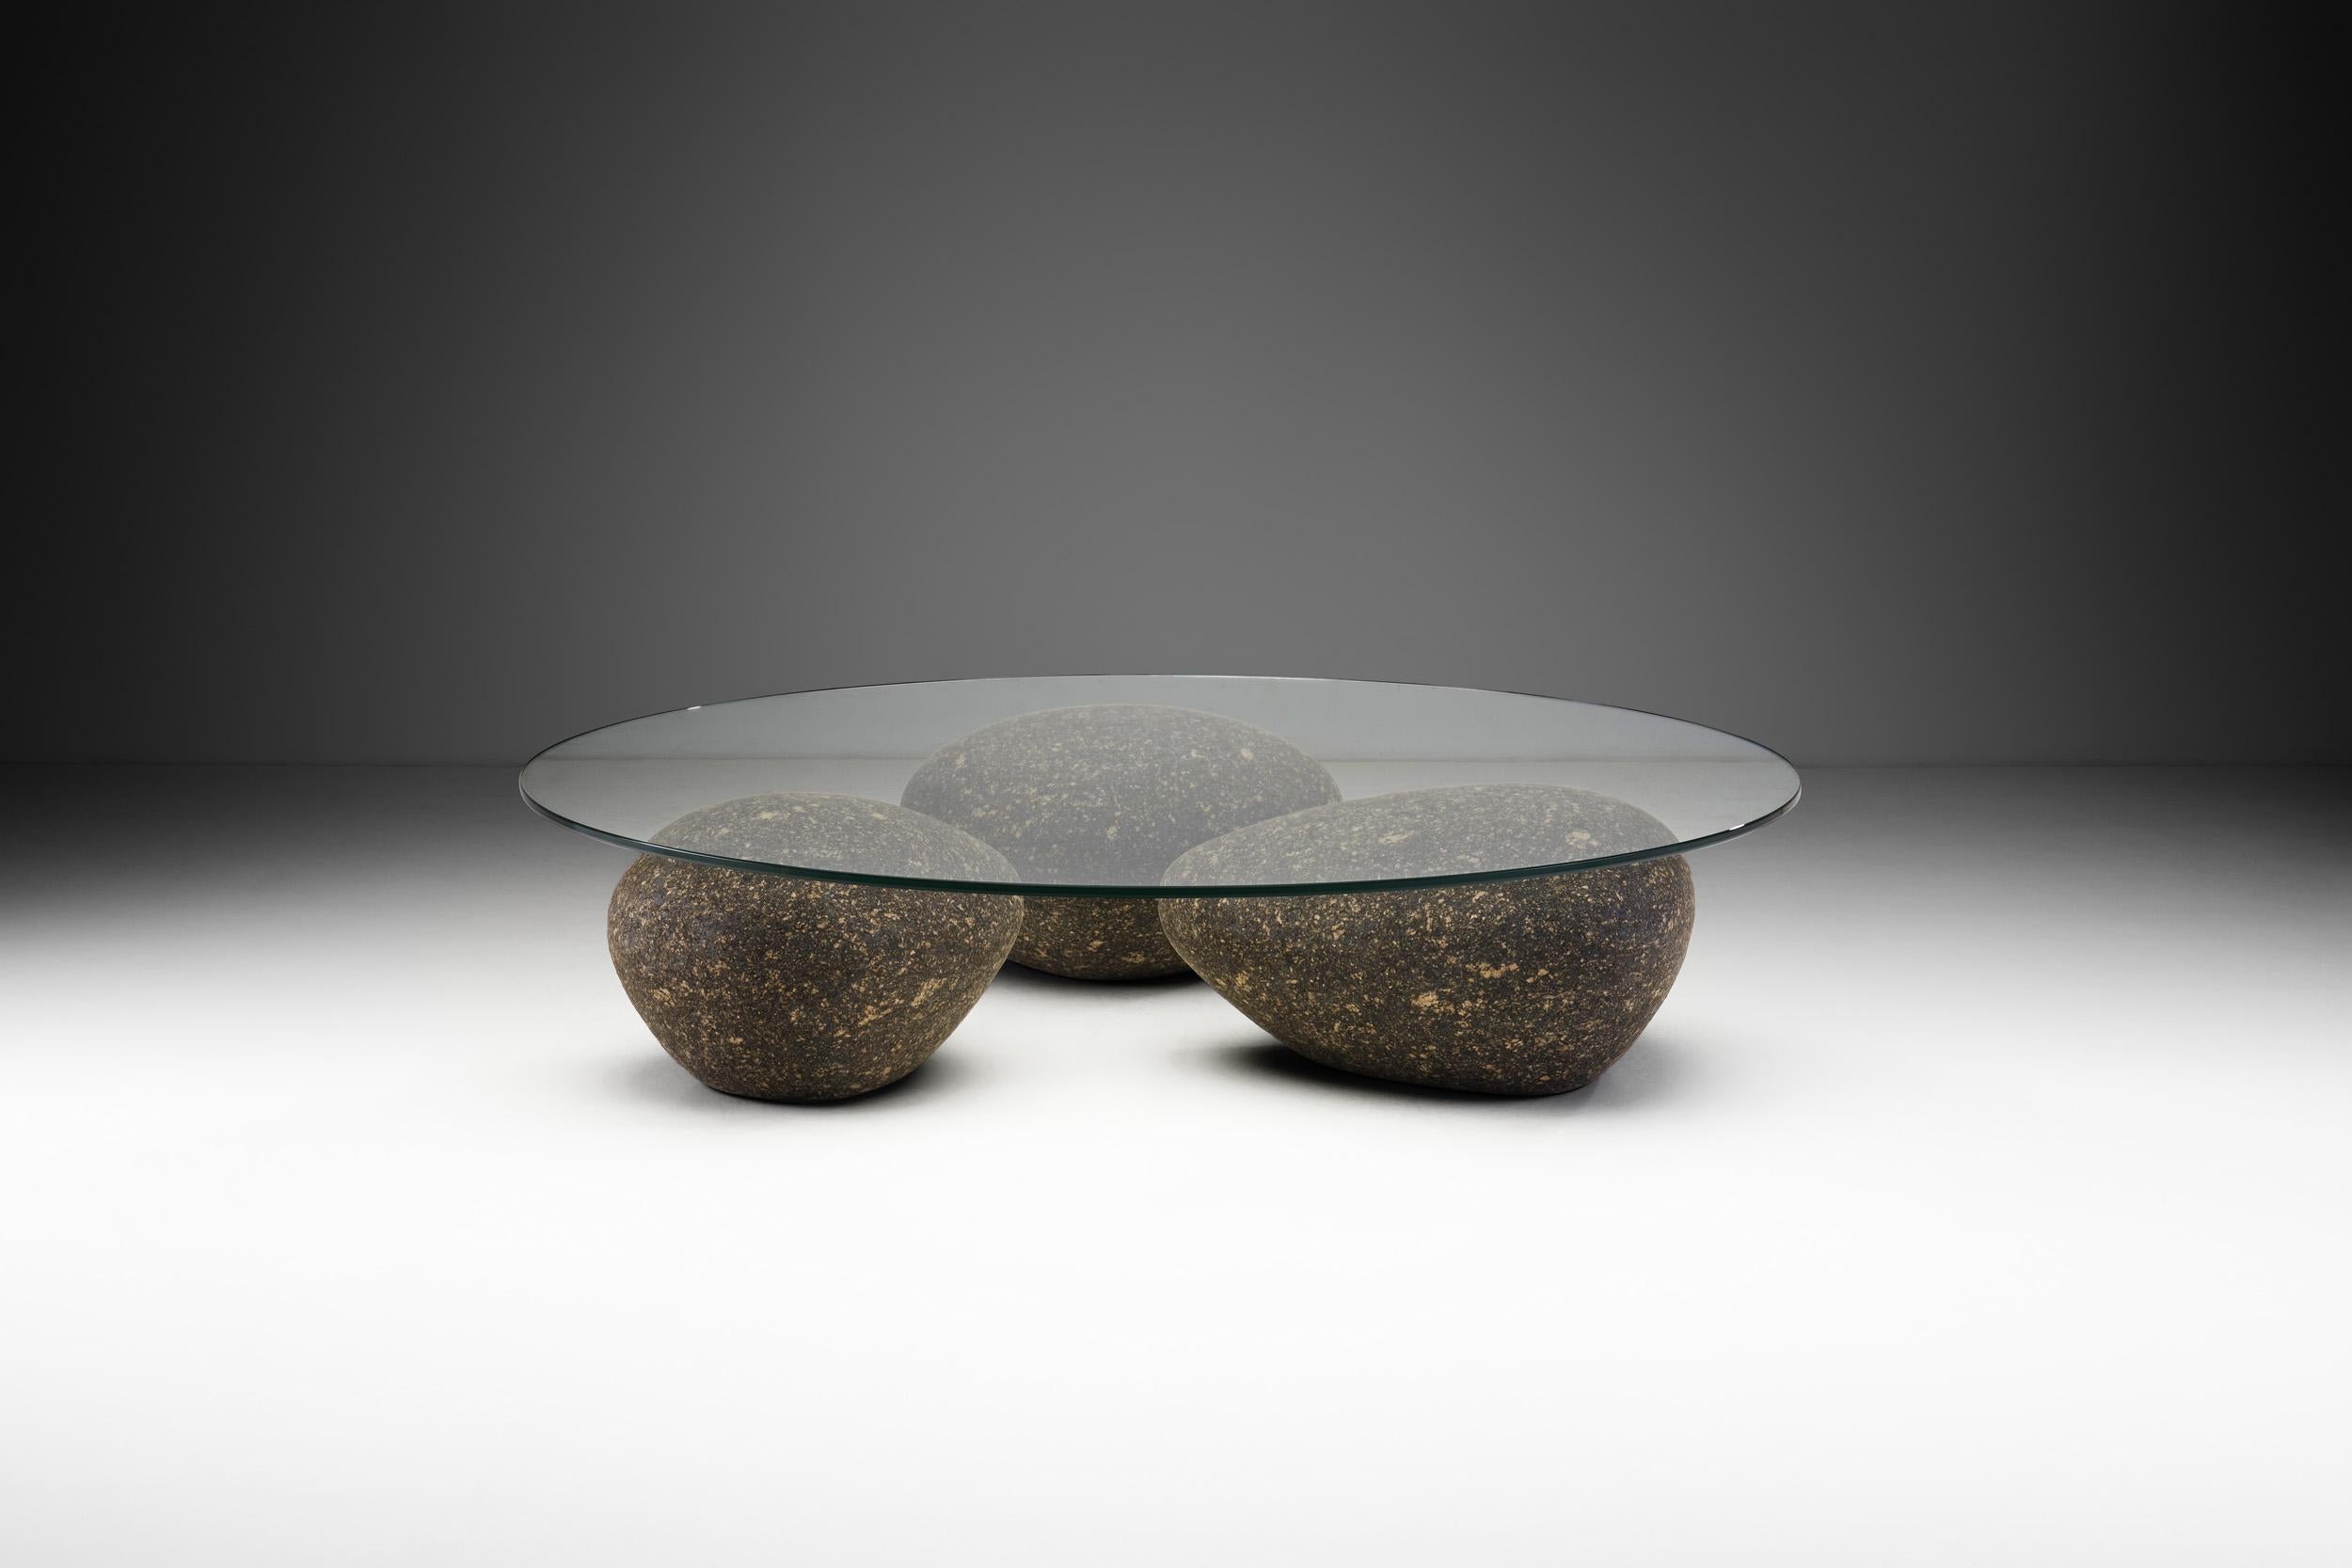 This Água table by contemporary artist Domingos Tótora, is an exceptional piece. The name, meaning water in Portuguese speaks for itself as the sight of this table’s design is akin to the process of sediment settling into a riverbed. There may be no